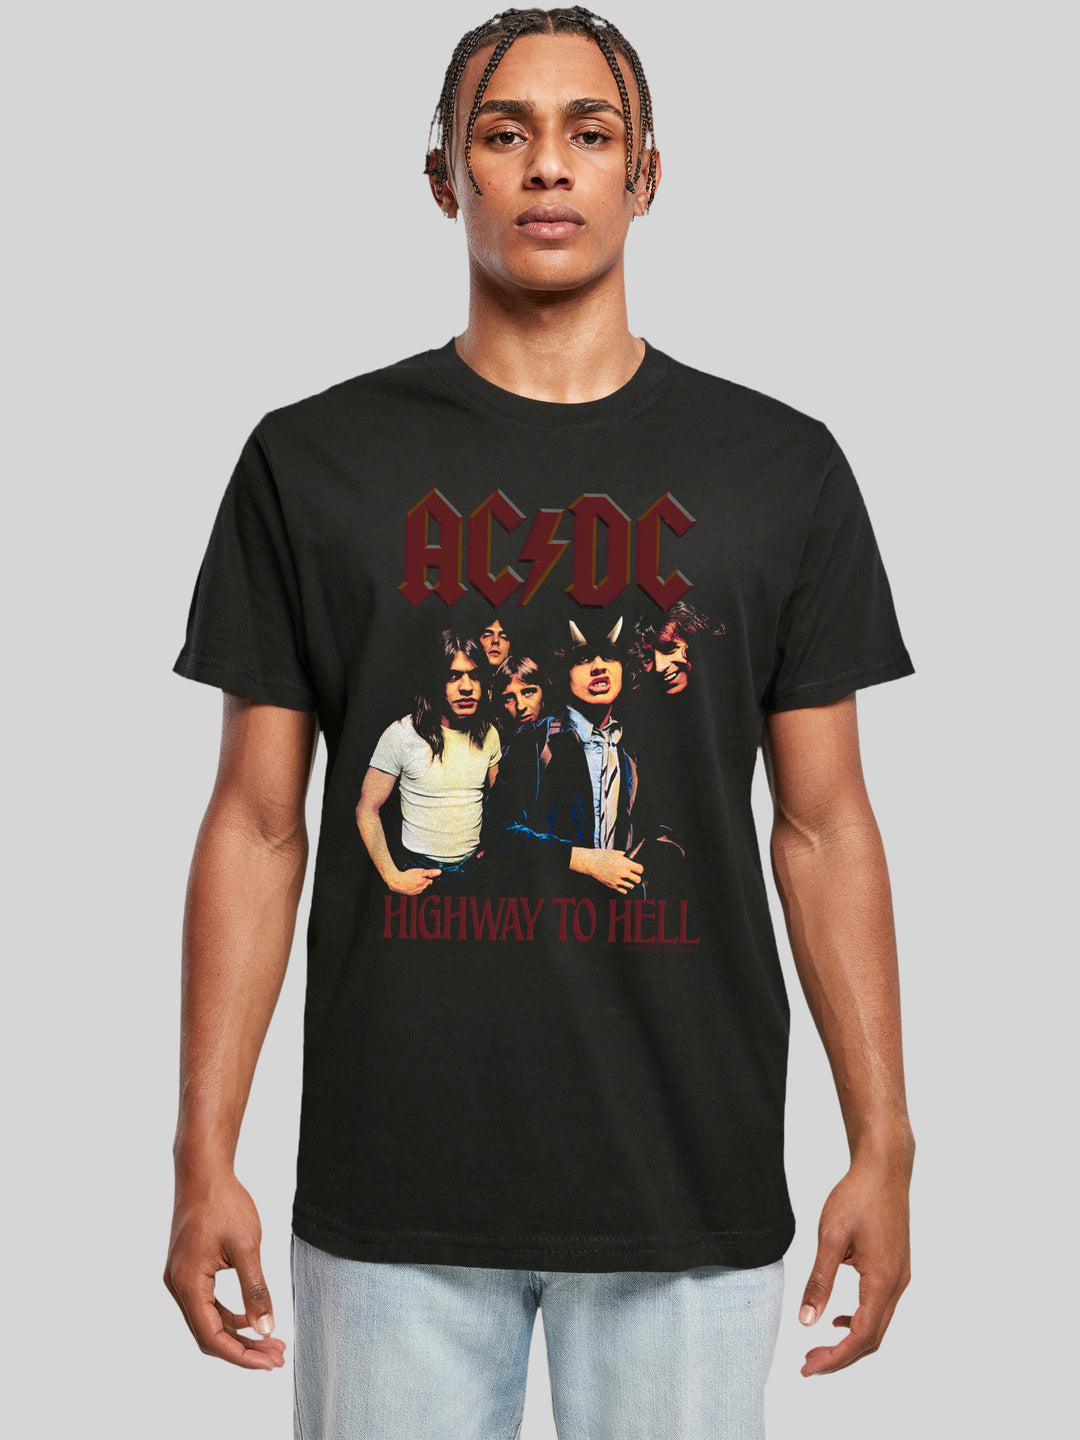 ACDC Highway To Hell Group mit Rundhals-T-Shirt